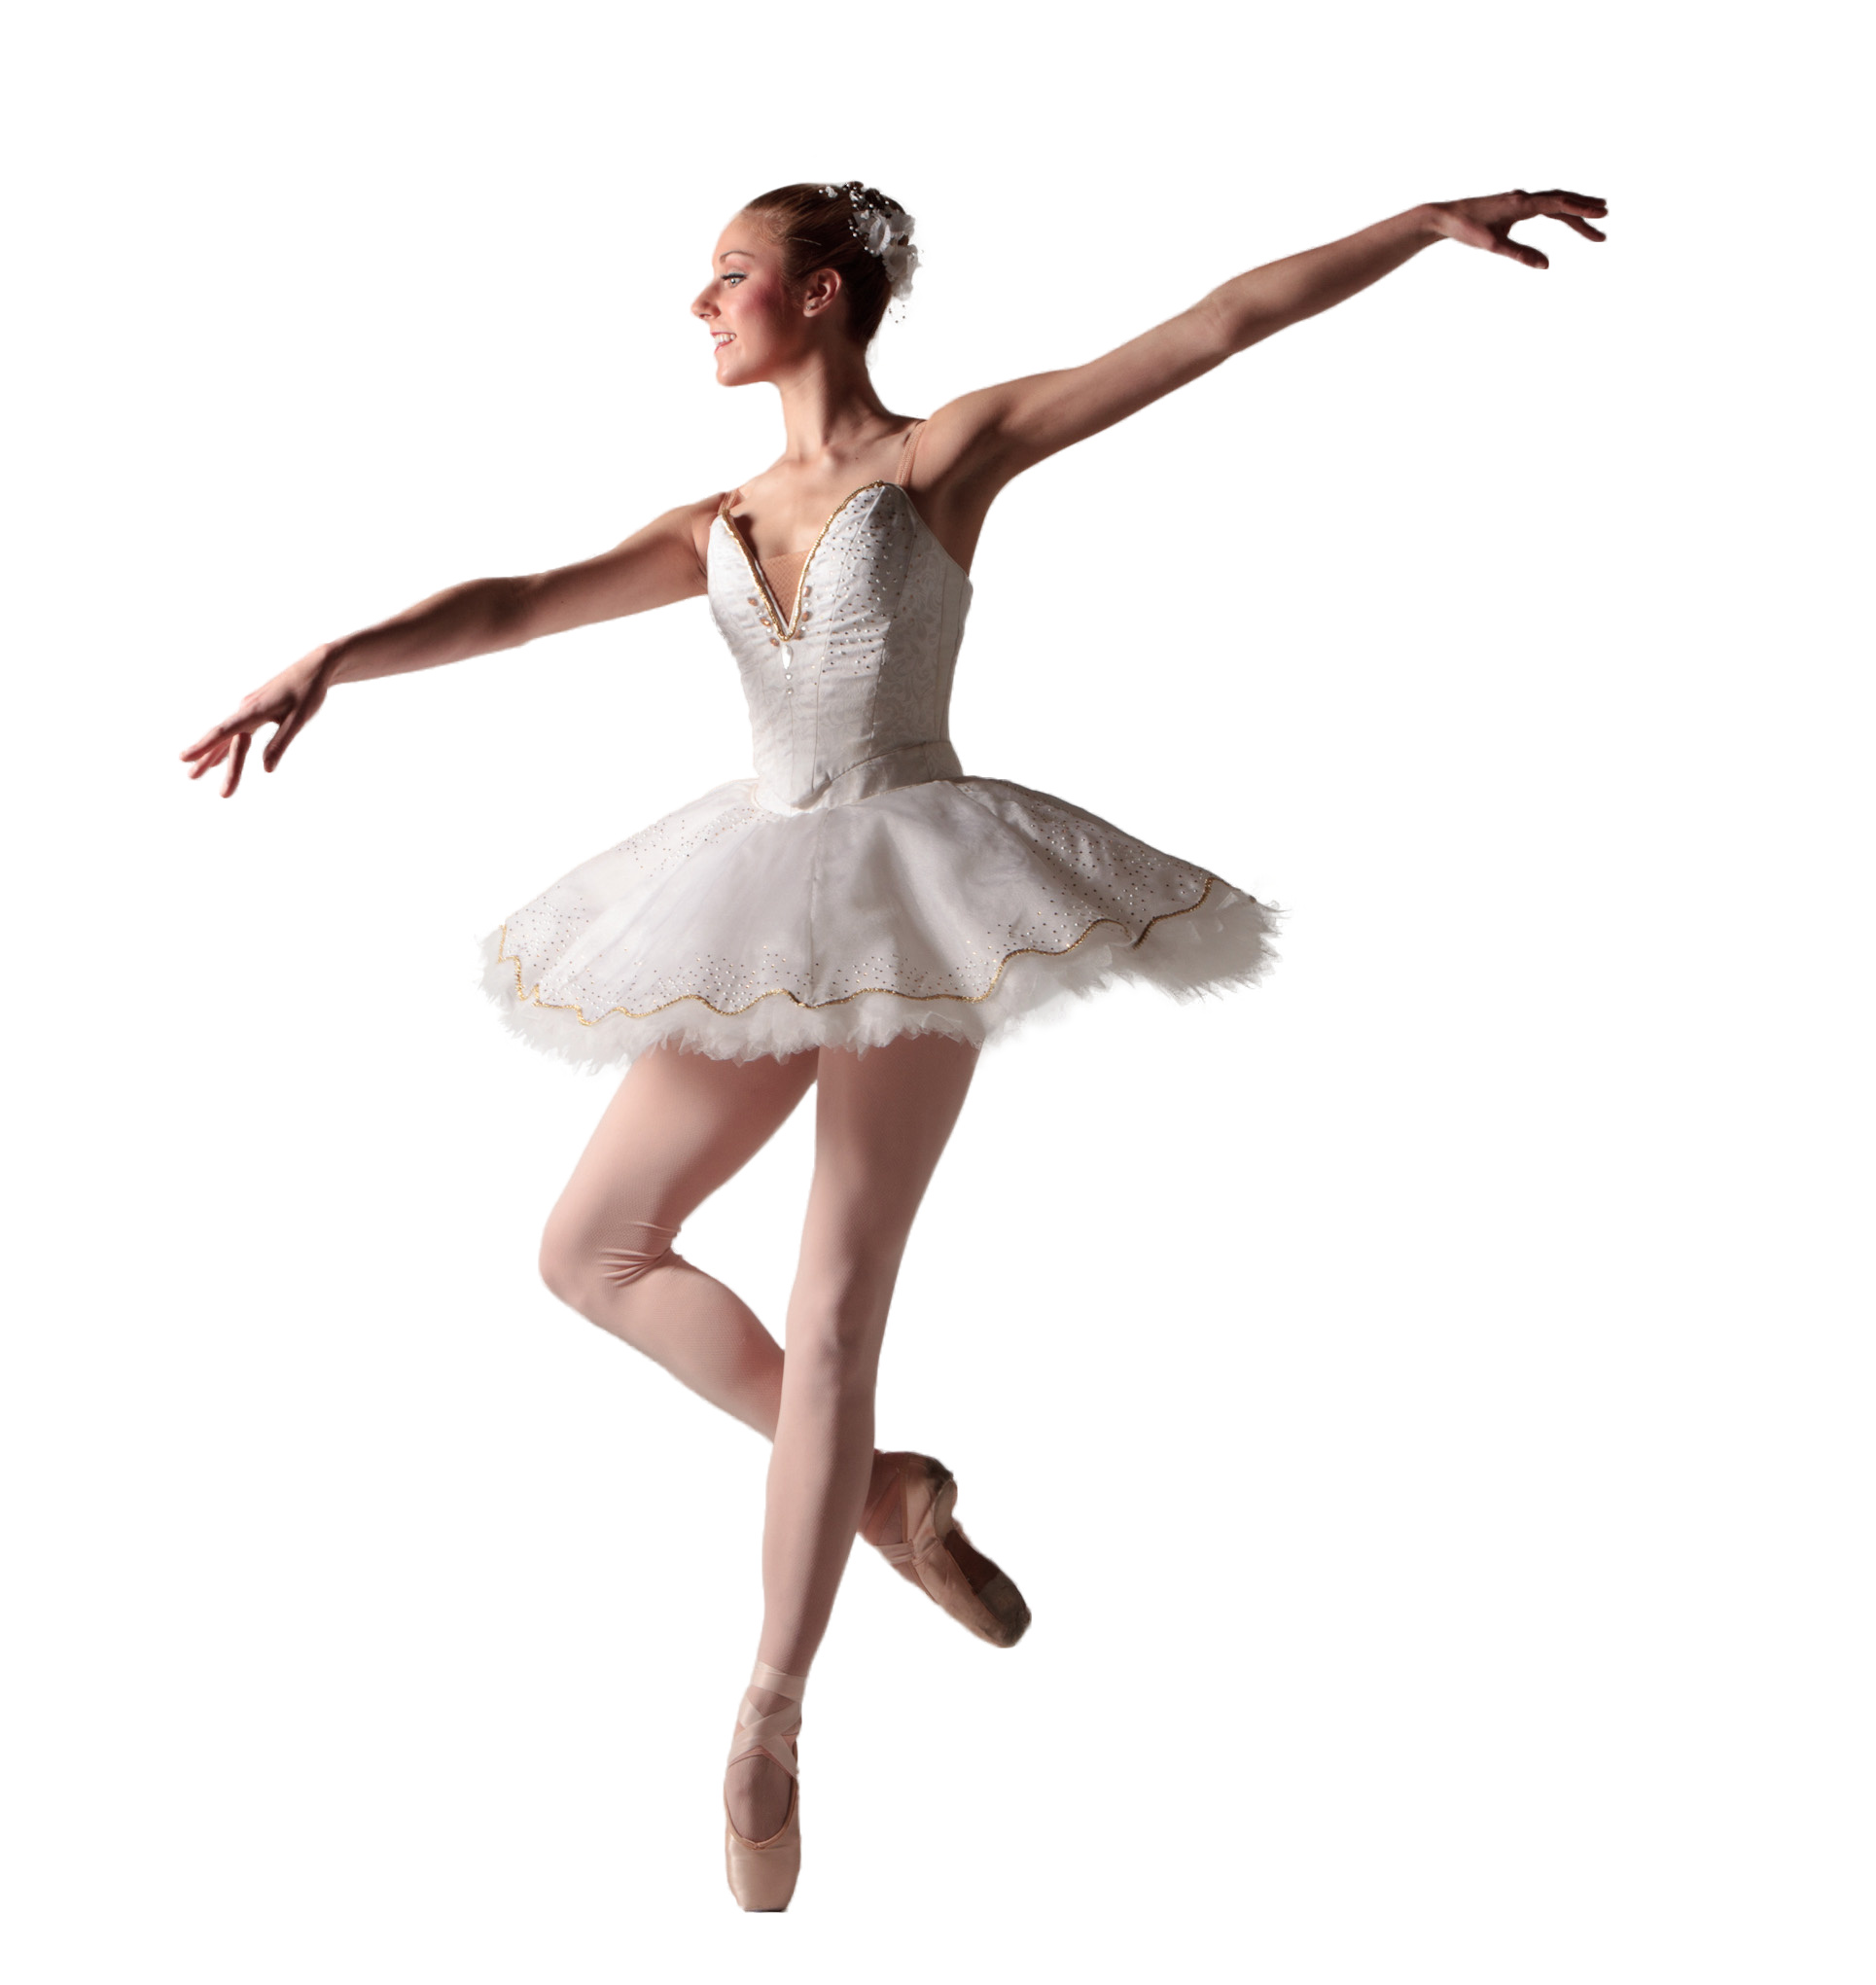 Artistic ballerinas, HQ wallpapers, Dramatic backgrounds, Captivating imagery, 1930x2050 HD Handy